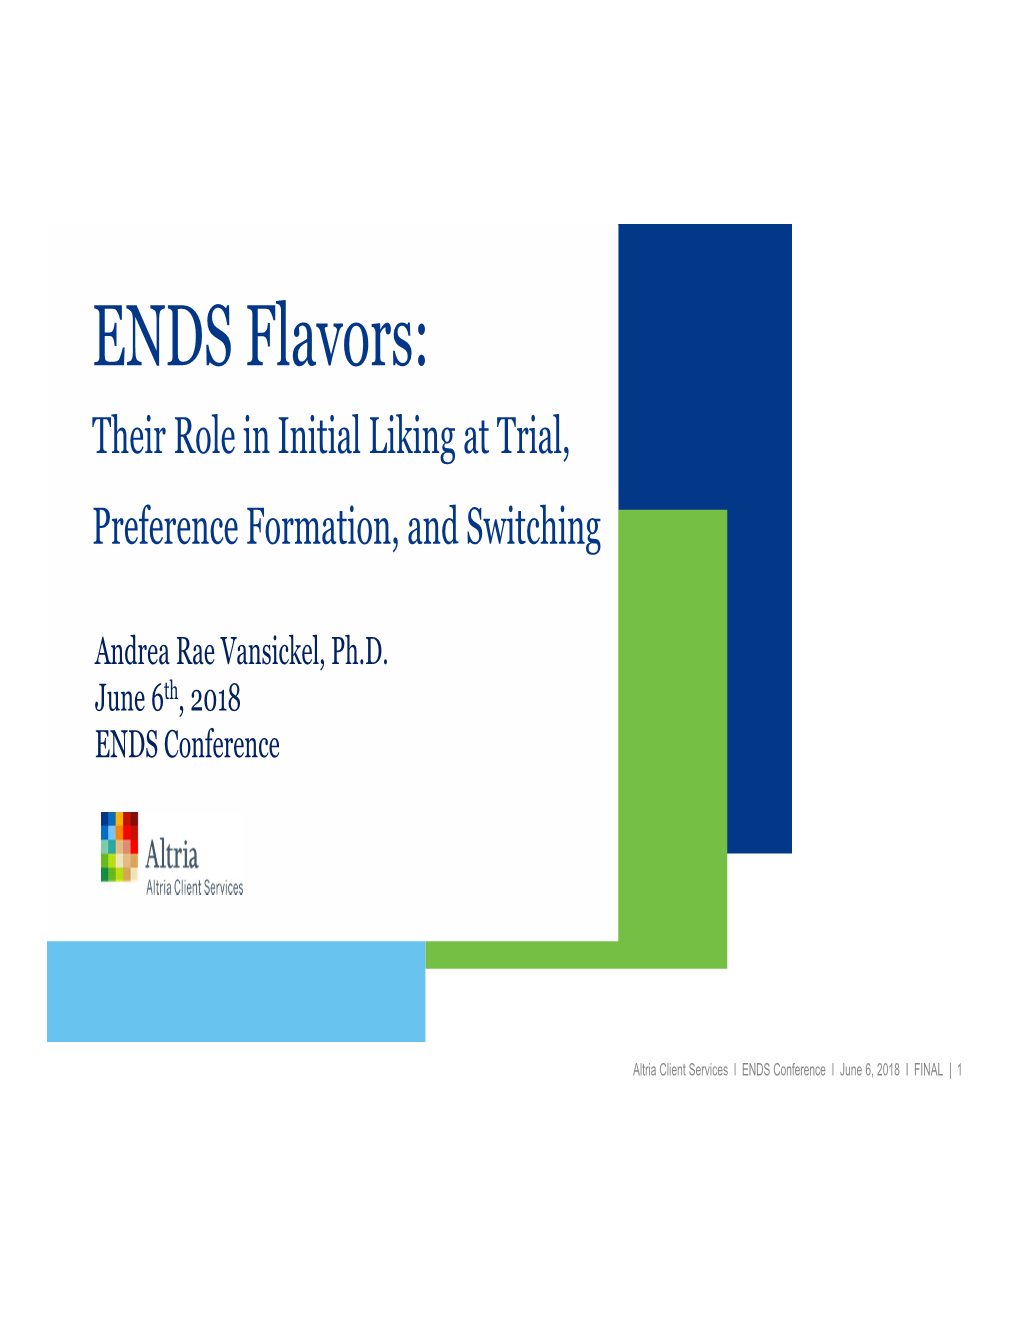 ENDS Flavors: Their Role in Initial Liking at Trial, Preference Formation, and Switching